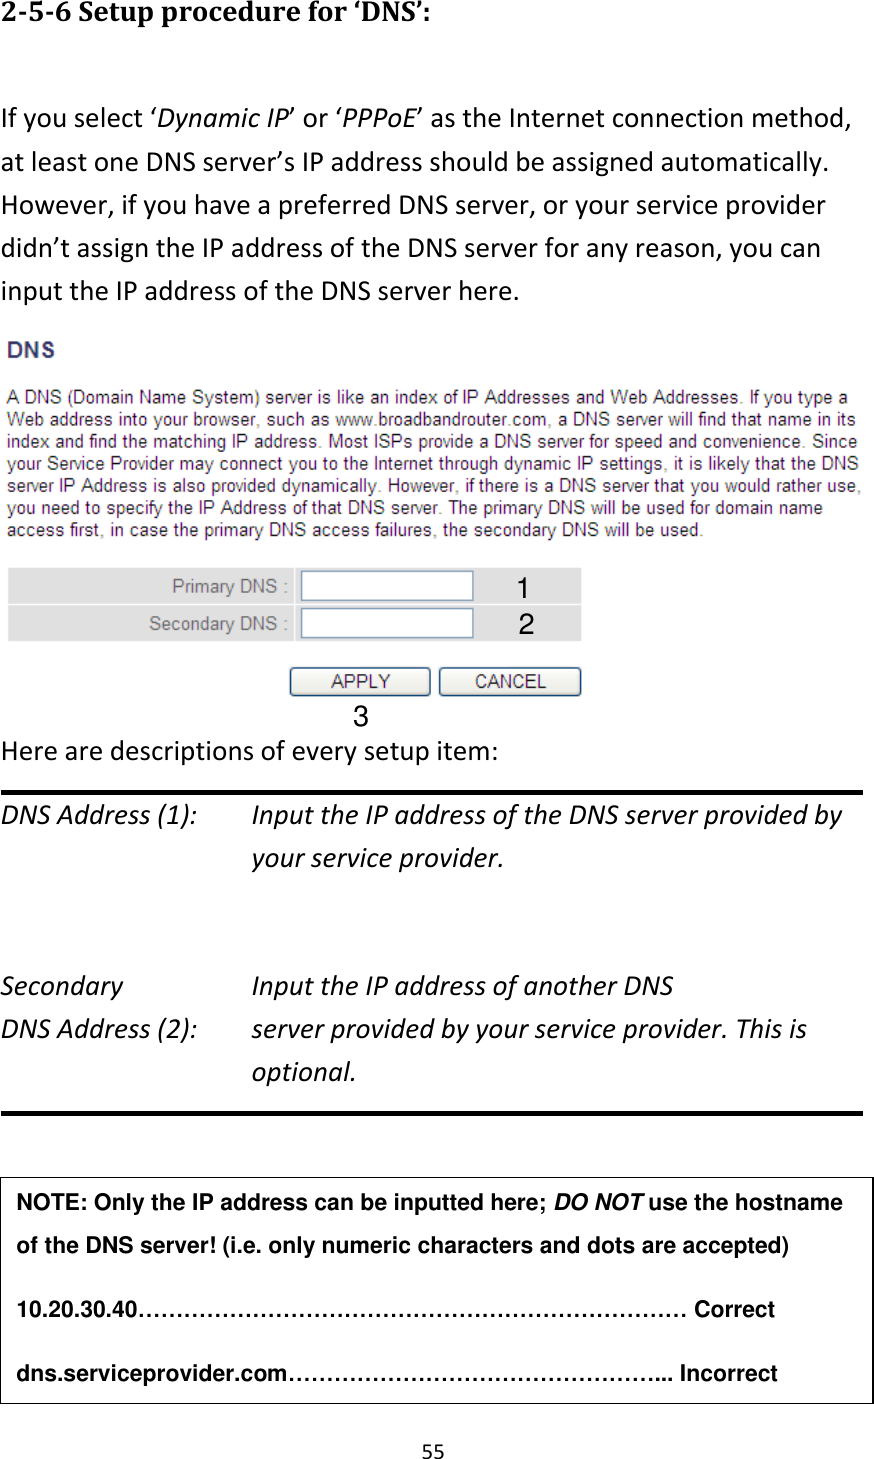 55 2-5-6 Setup procedure for ‘DNS’:  If you select ‘Dynamic IP’ or ‘PPPoE’ as the Internet connection method, at least one DNS server’s IP address should be assigned automatically. However, if you have a preferred DNS server, or your service provider didn’t assign the IP address of the DNS server for any reason, you can input the IP address of the DNS server here.    Here are descriptions of every setup item: DNS Address (1):    Input the IP address of the DNS server provided by your service provider.  Secondary        Input the IP address of another DNS DNS Address (2):    server provided by your service provider. This is optional.      NOTE: Only the IP address can be inputted here; DO NOT use the hostname of the DNS server! (i.e. only numeric characters and dots are accepted) 10.20.30.40……………………………………………………………… Correct dns.serviceprovider.com…………………………………………... Incorrect  1 2 3 